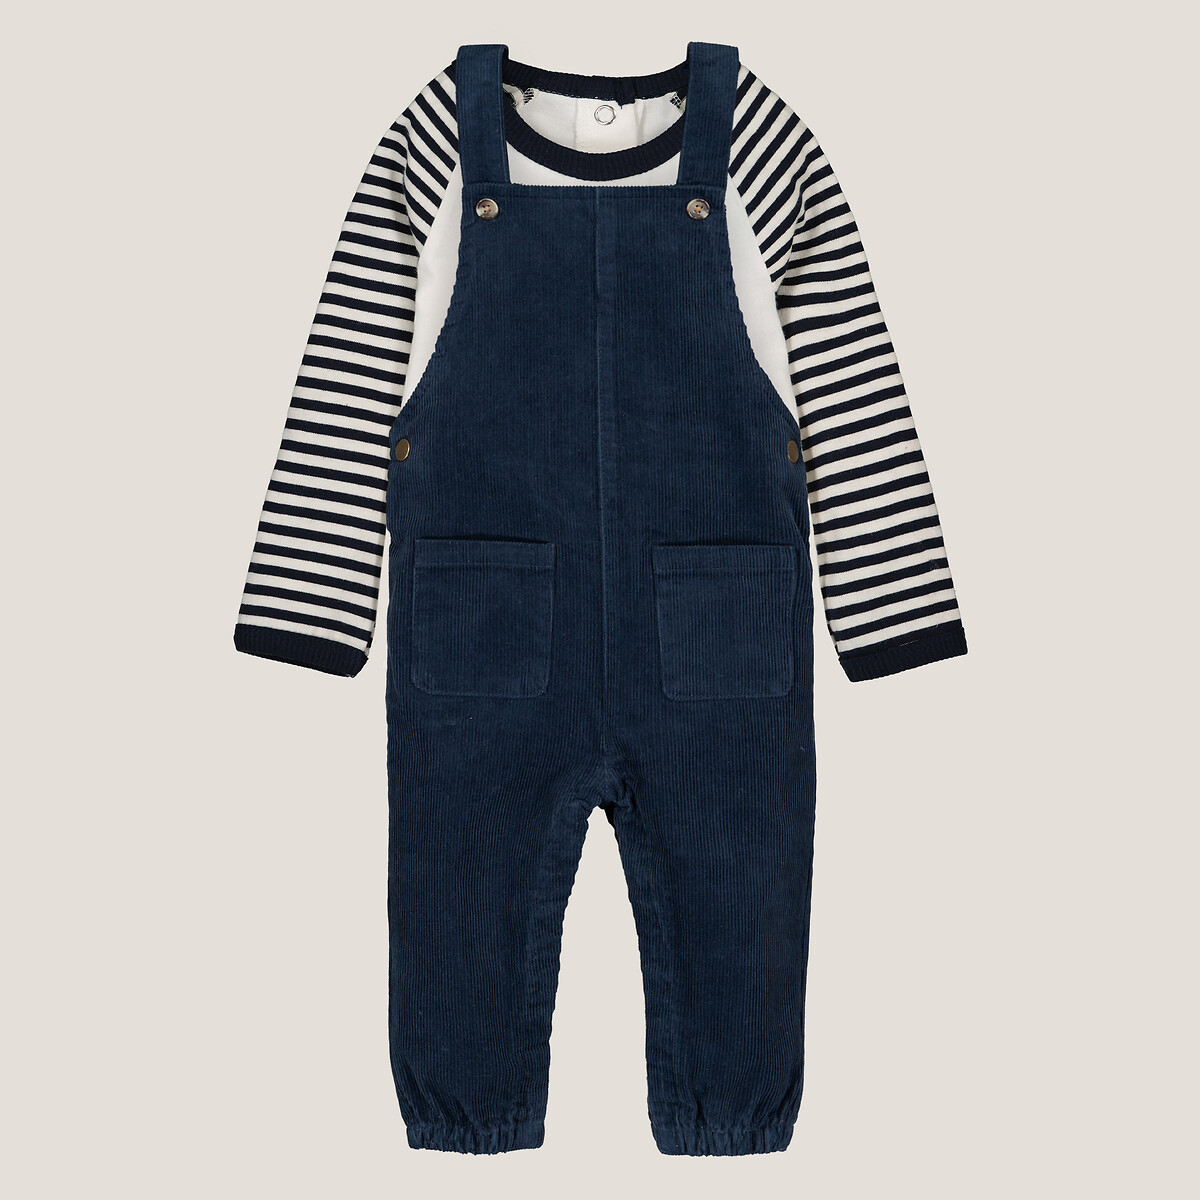 Cotton T-Shirt/Corduroy Dungarees Outfit